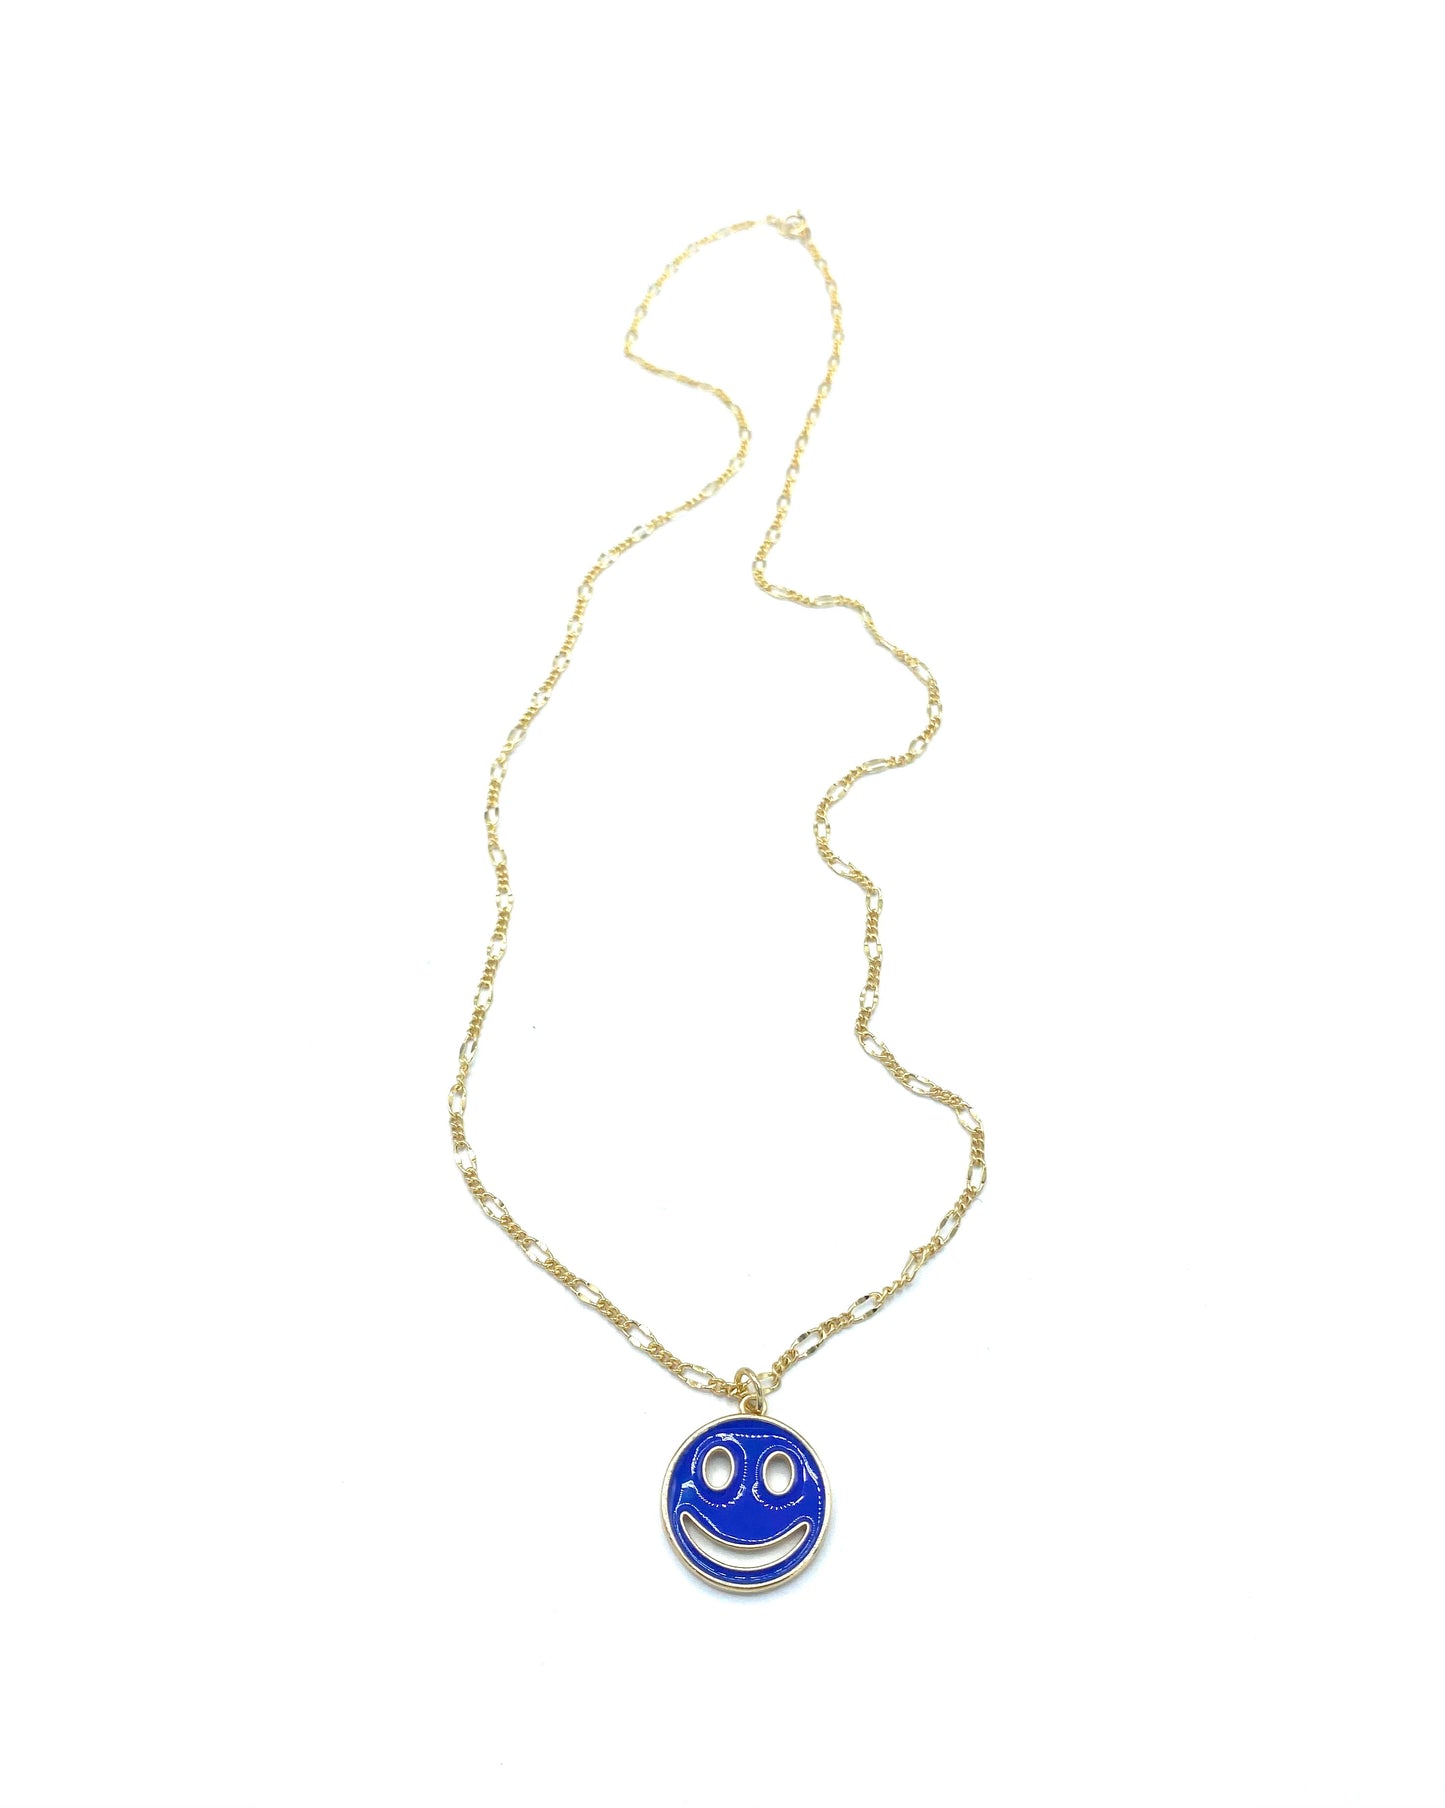 LONG SMILEY NECKLACE